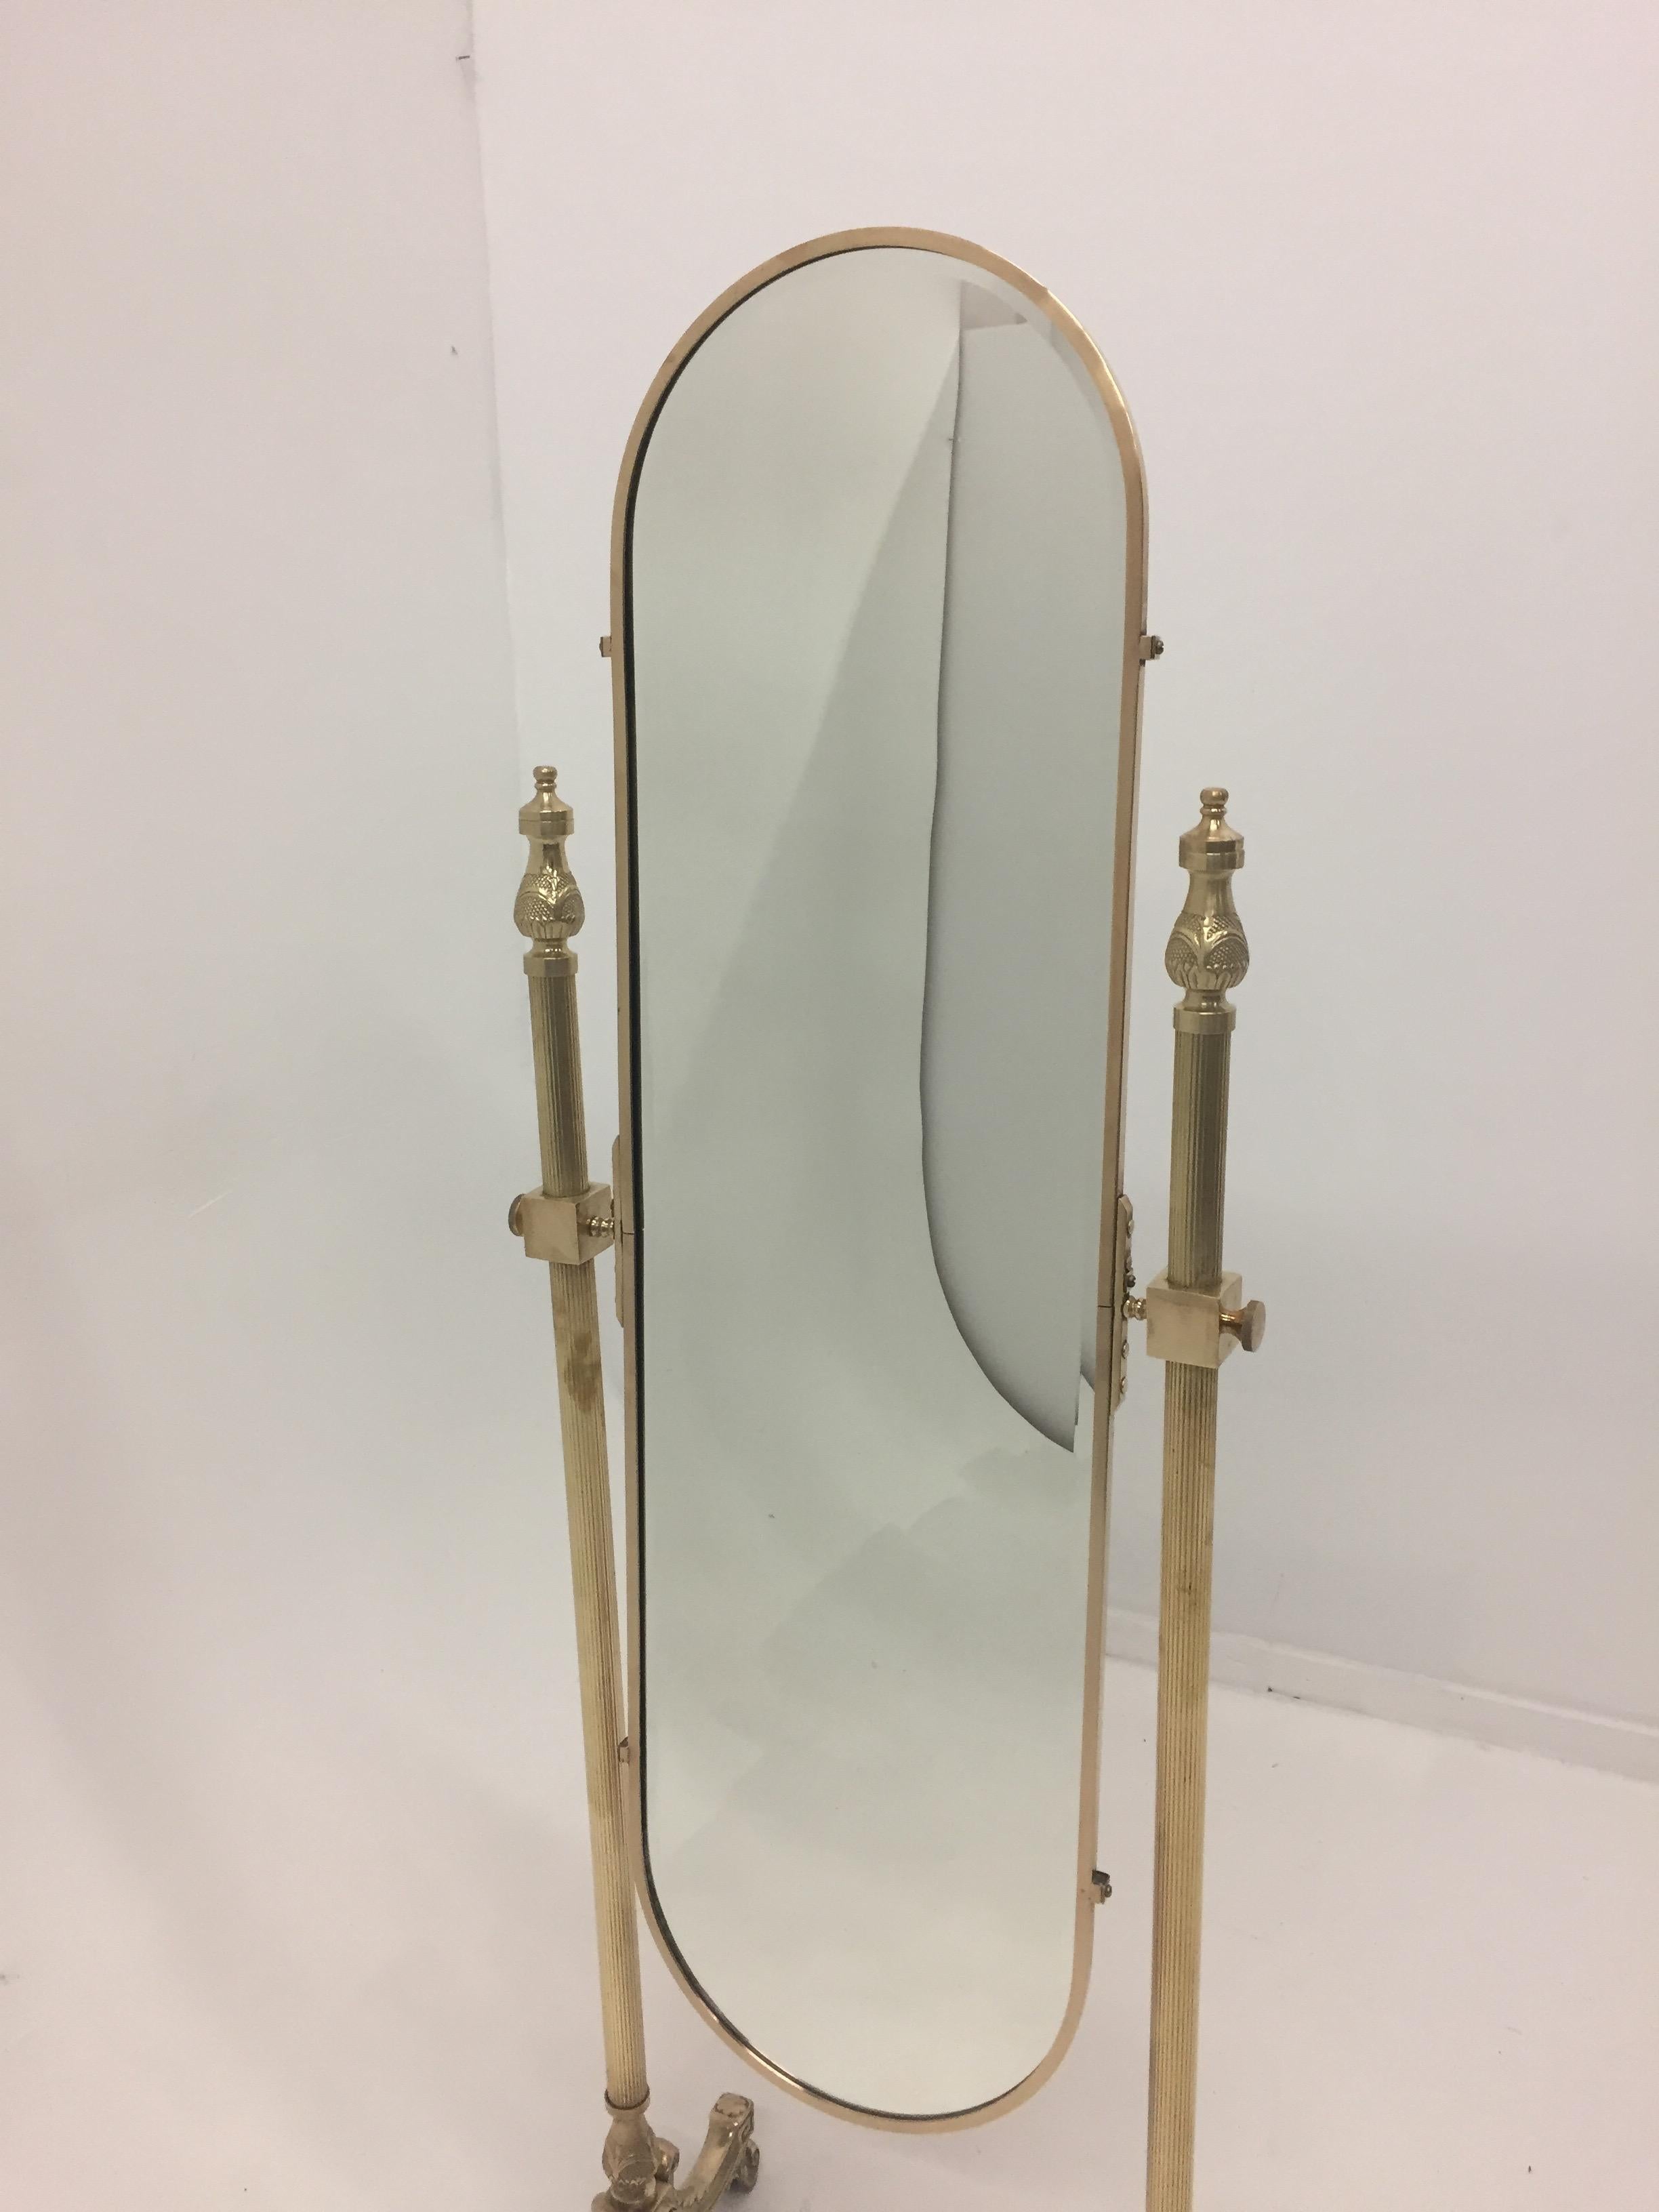 A very pretty Brass Recoco Chaval mirror having ornate feet and lovely oval full length mirror. Was just professionally polished to a gorgeous patina.